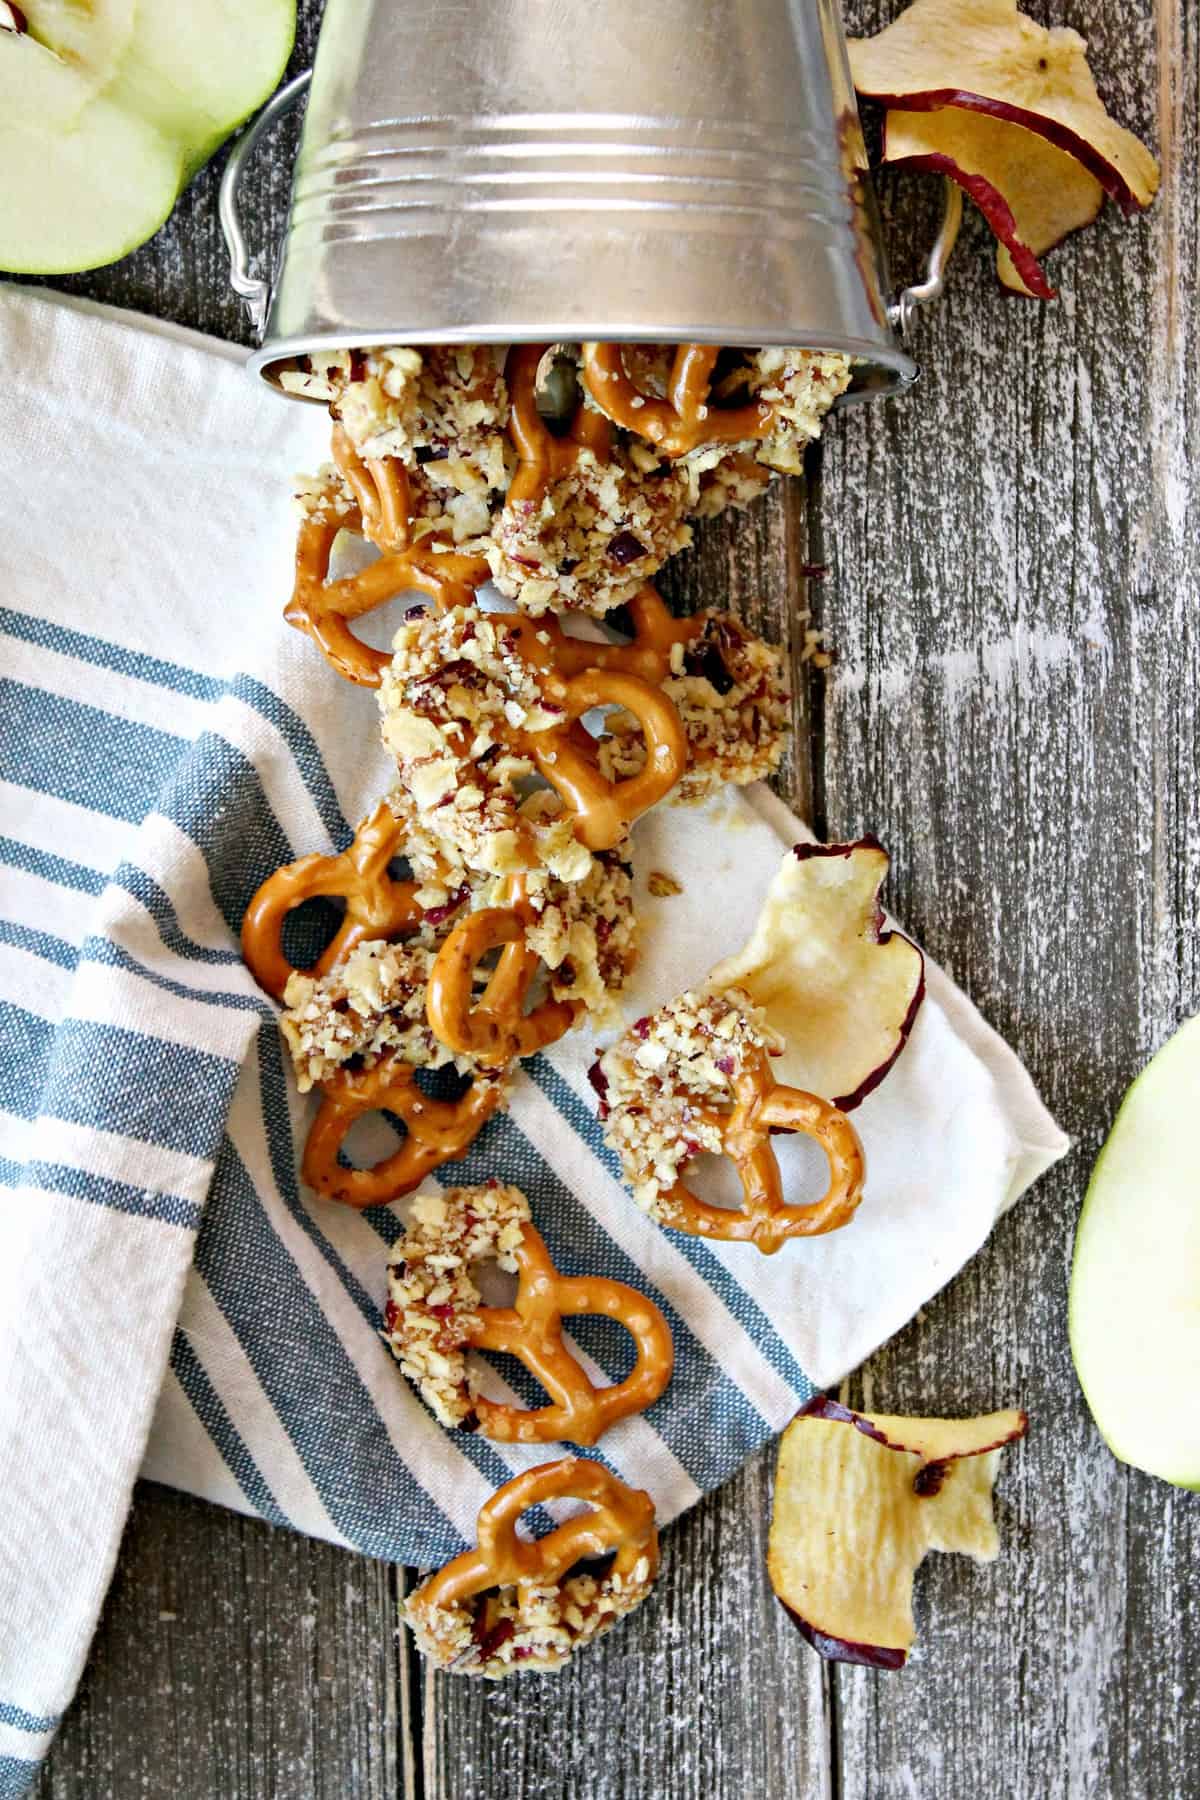 Caramel Apple Dipped Pretzel Bites! Crunchy mini pretzels dipped in sweet caramel and rolled in crushed apple chips will be the highlight of your fall dessert table! These irresistible, easy-to-make bites make fantastic game day snacks for tailgates and fall parties; they also make a great treat to package and gift for any autumn occasion.